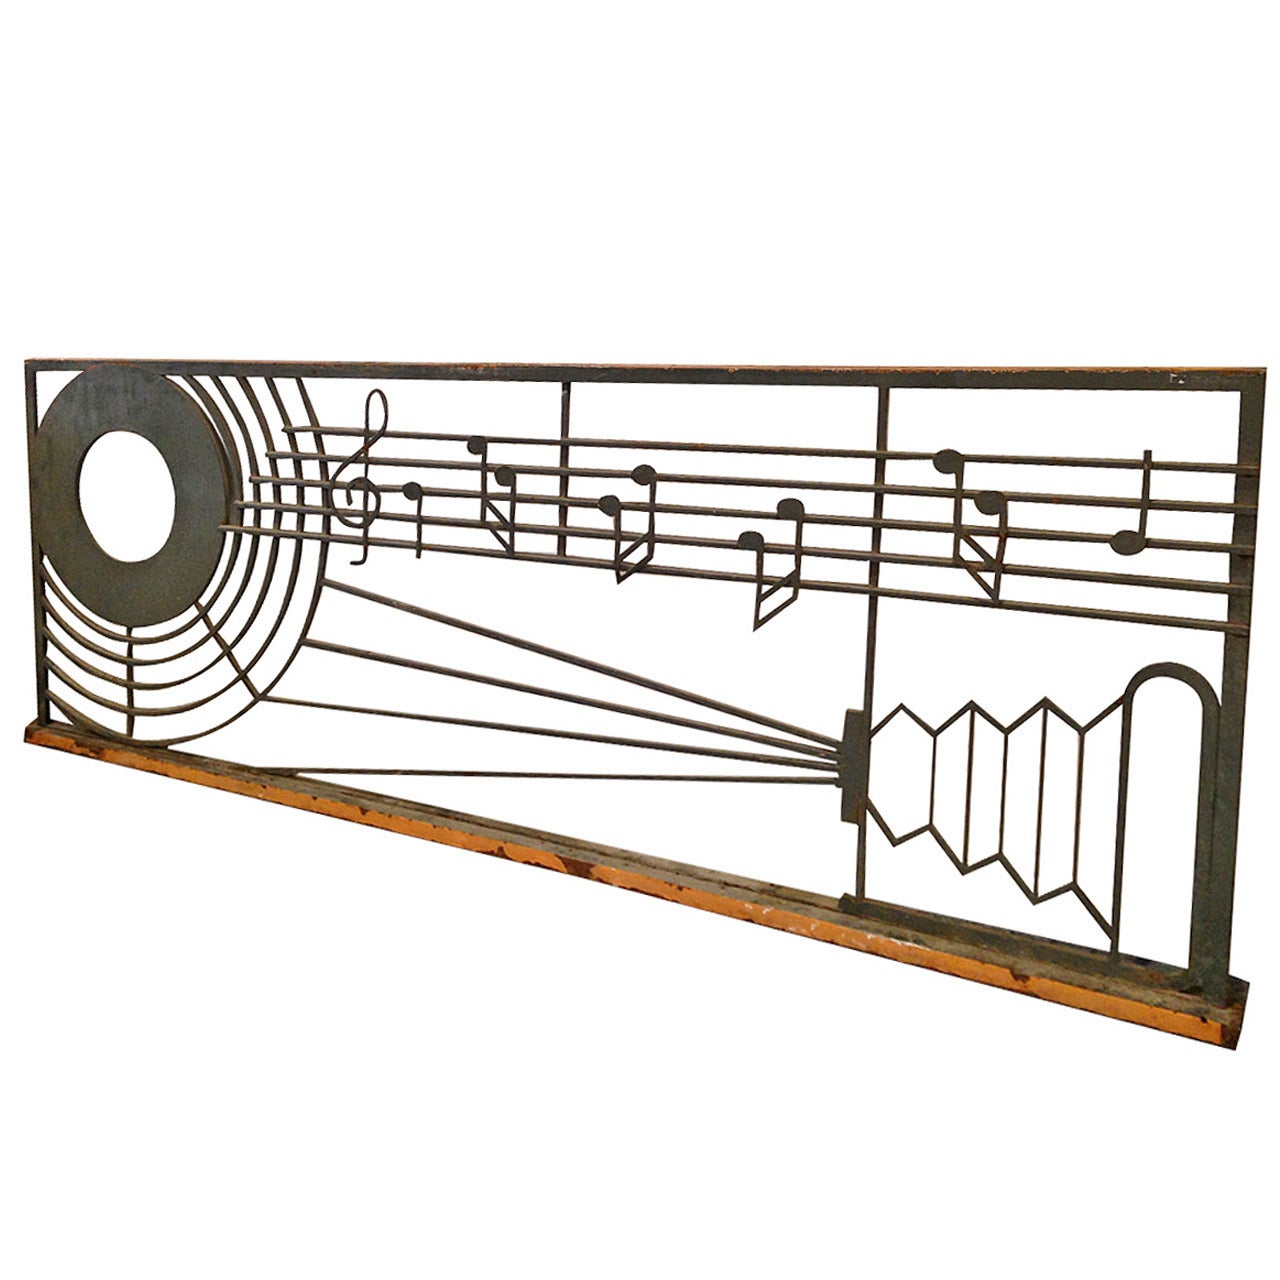 Vintage French Wrought Iron Grille with Music Motifs